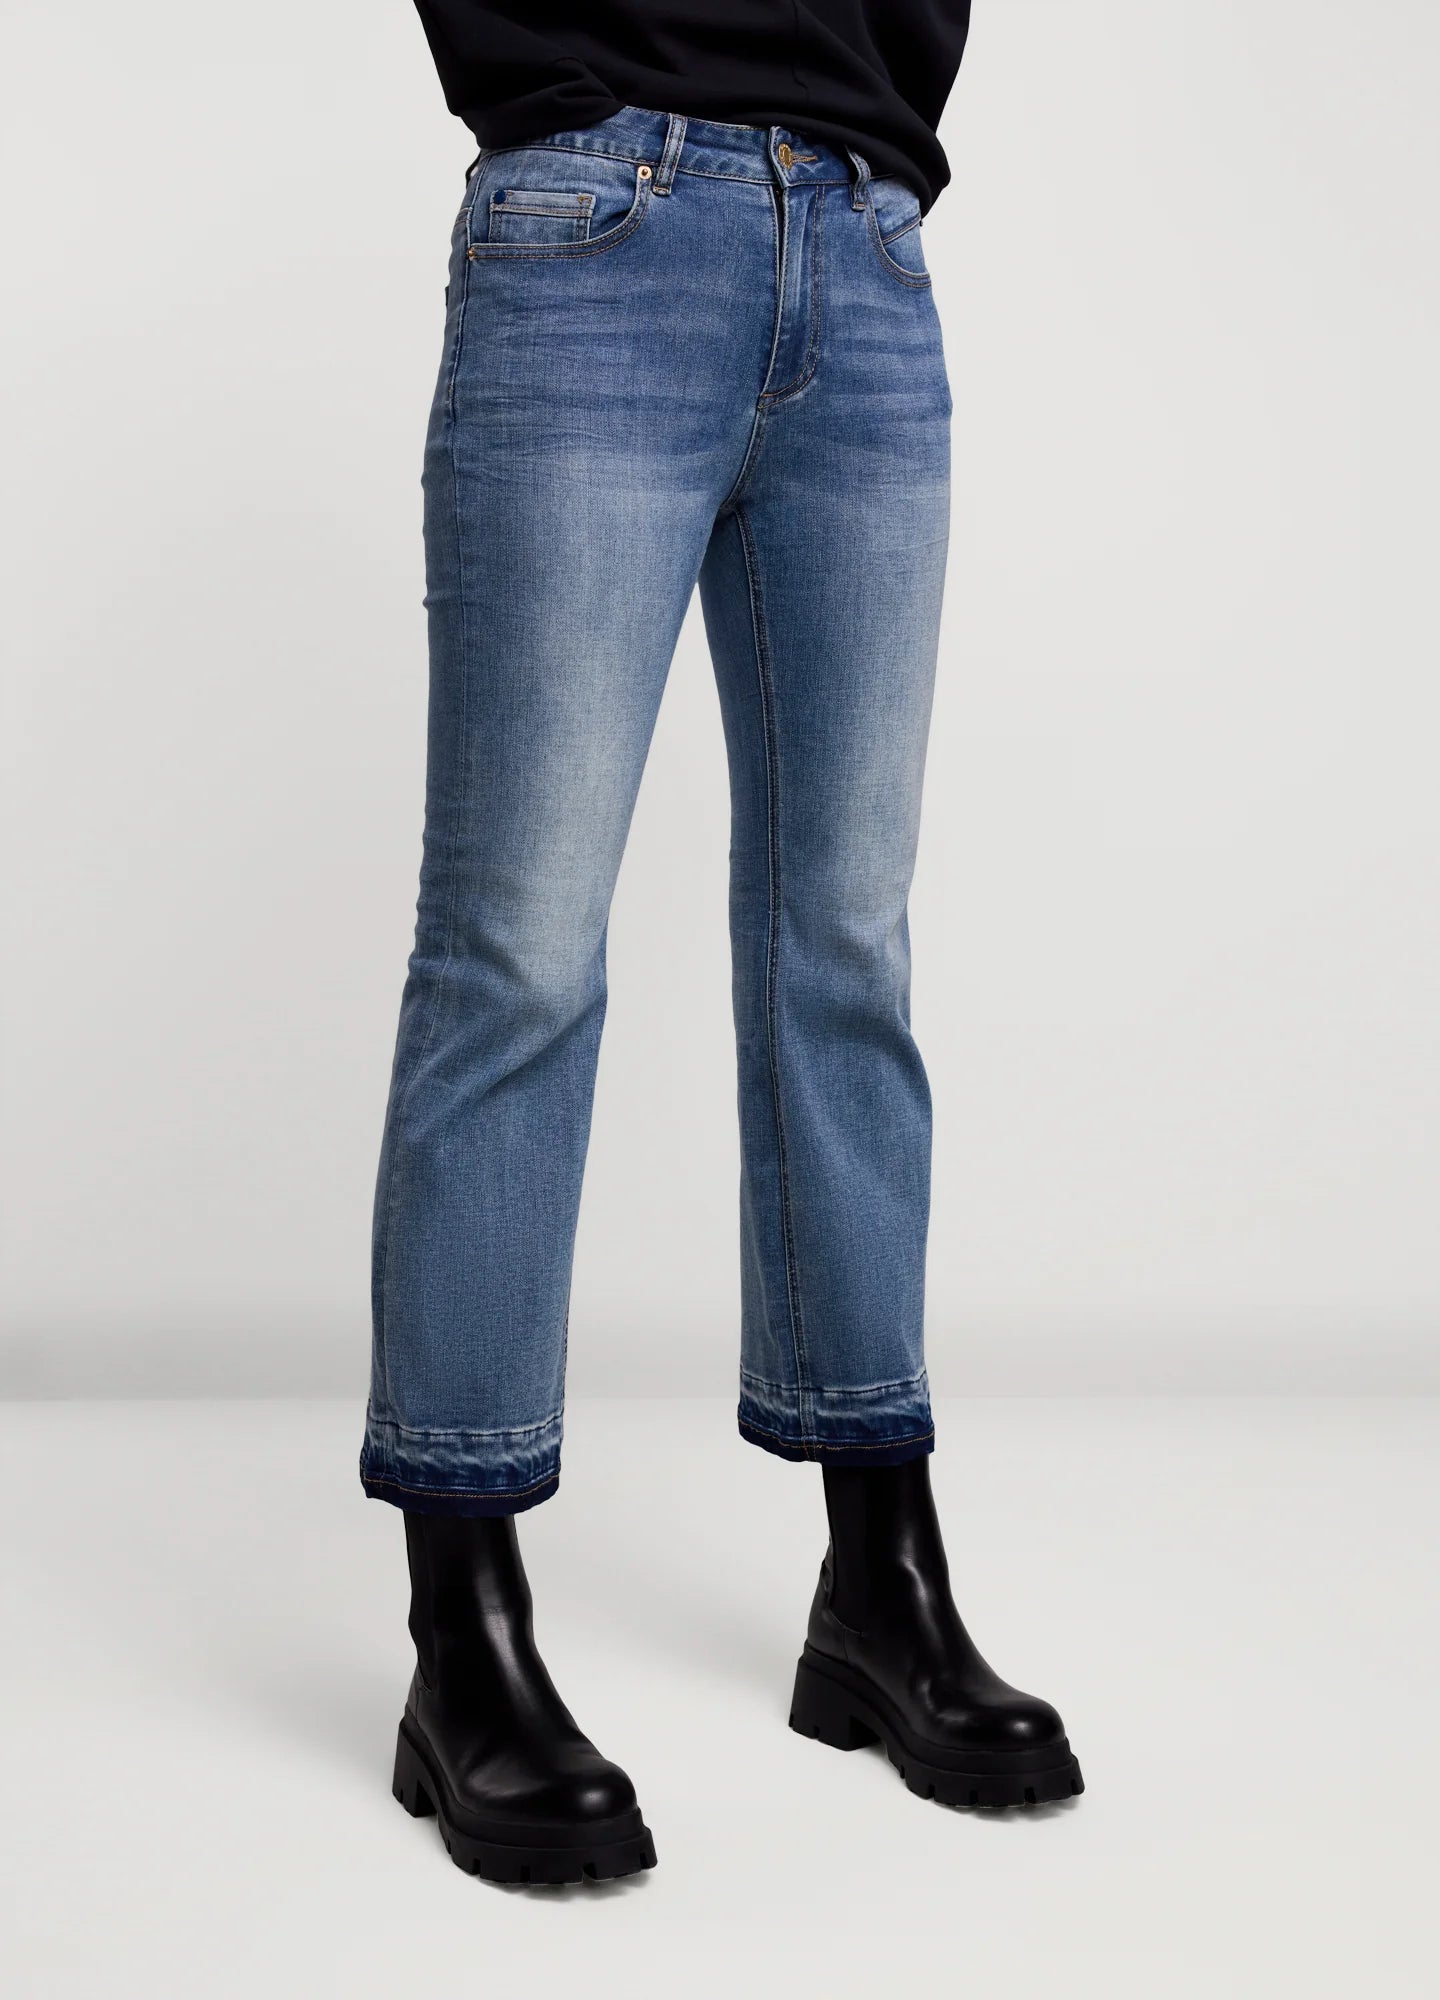 Bootcut Jeans in Bright Wash